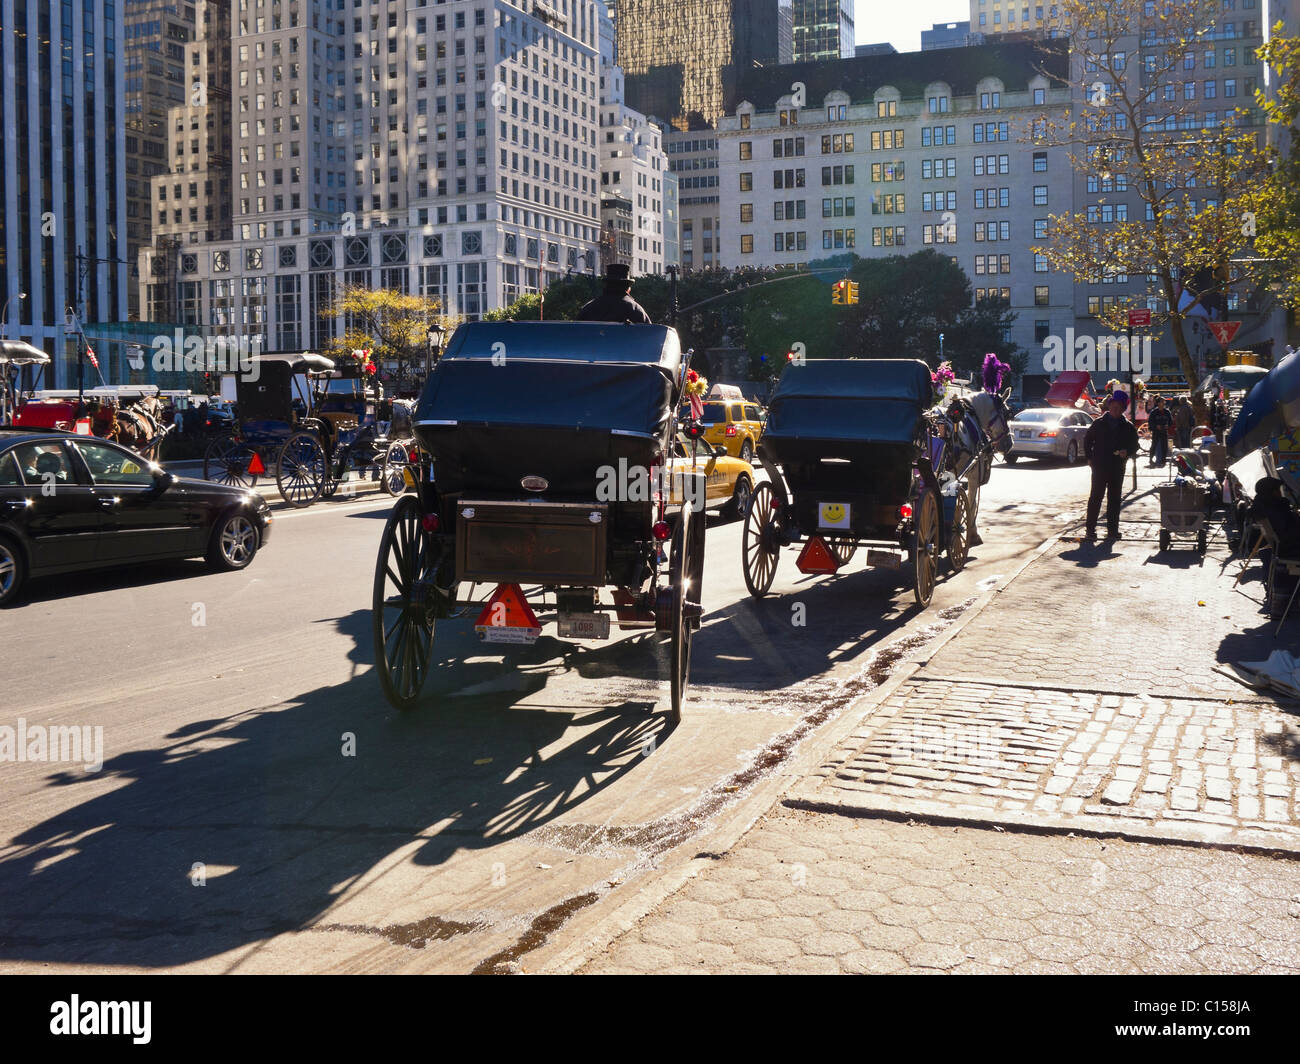 Carriages near Central Park in Manhattan awaiting hire. Stock Photo